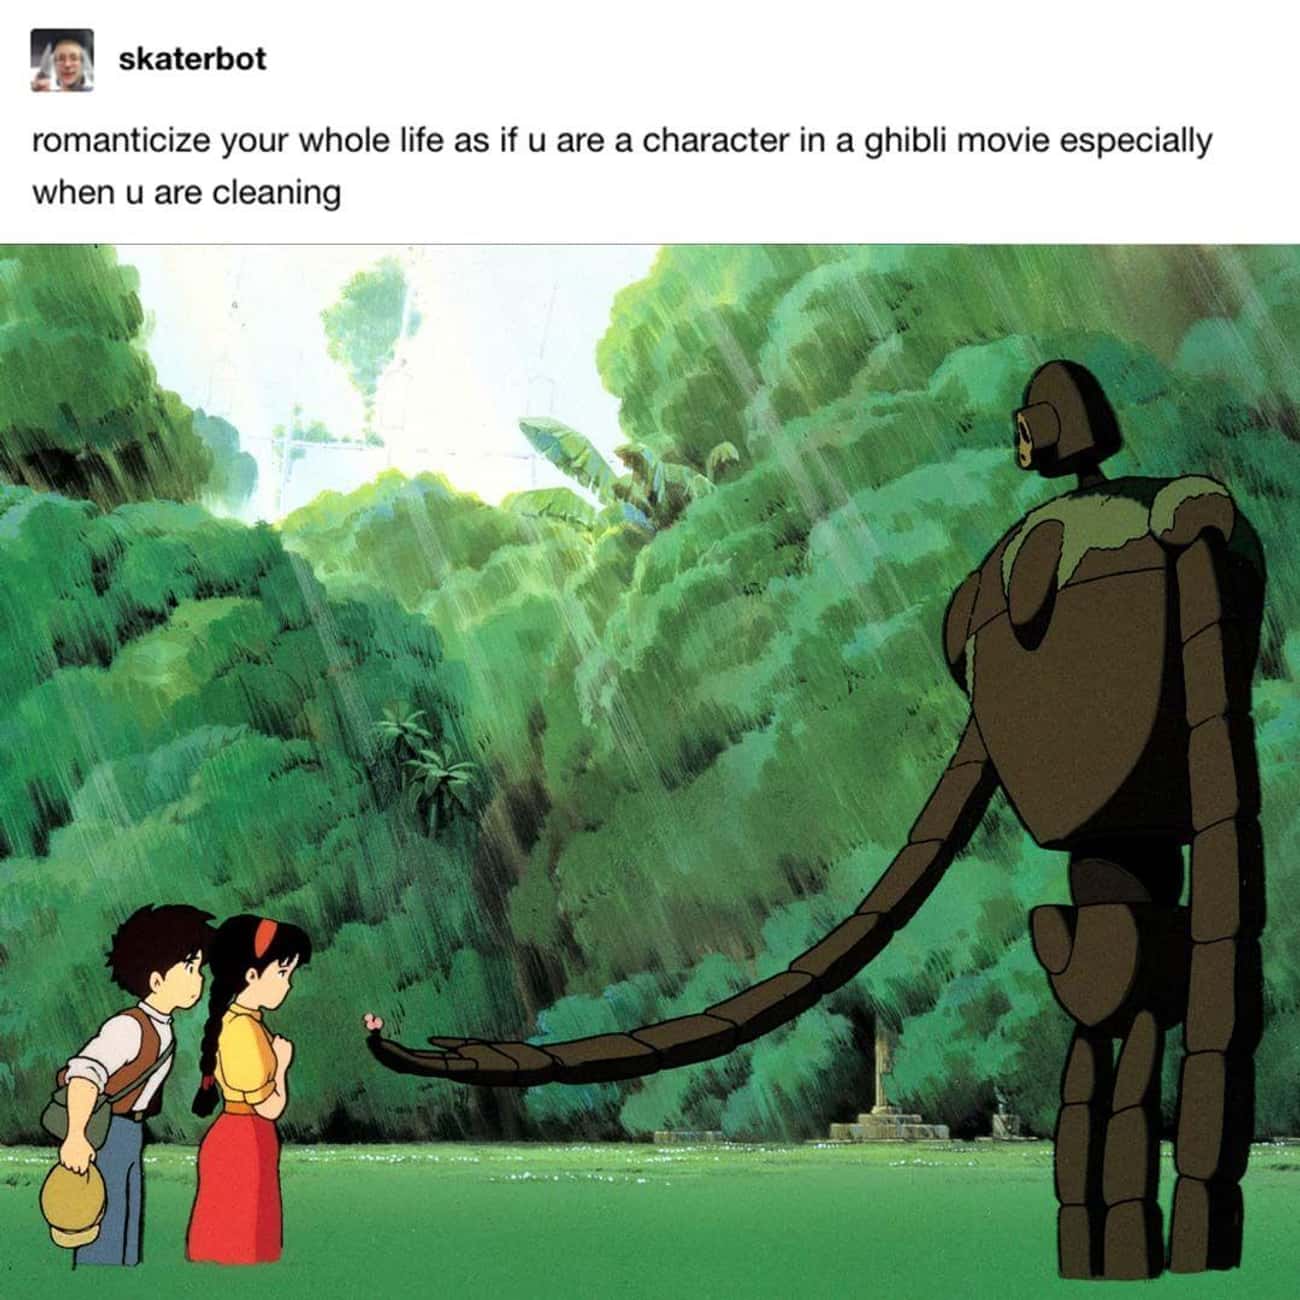 Live Your Life Like A Ghibli Movie - ‘Castle In The Sky’